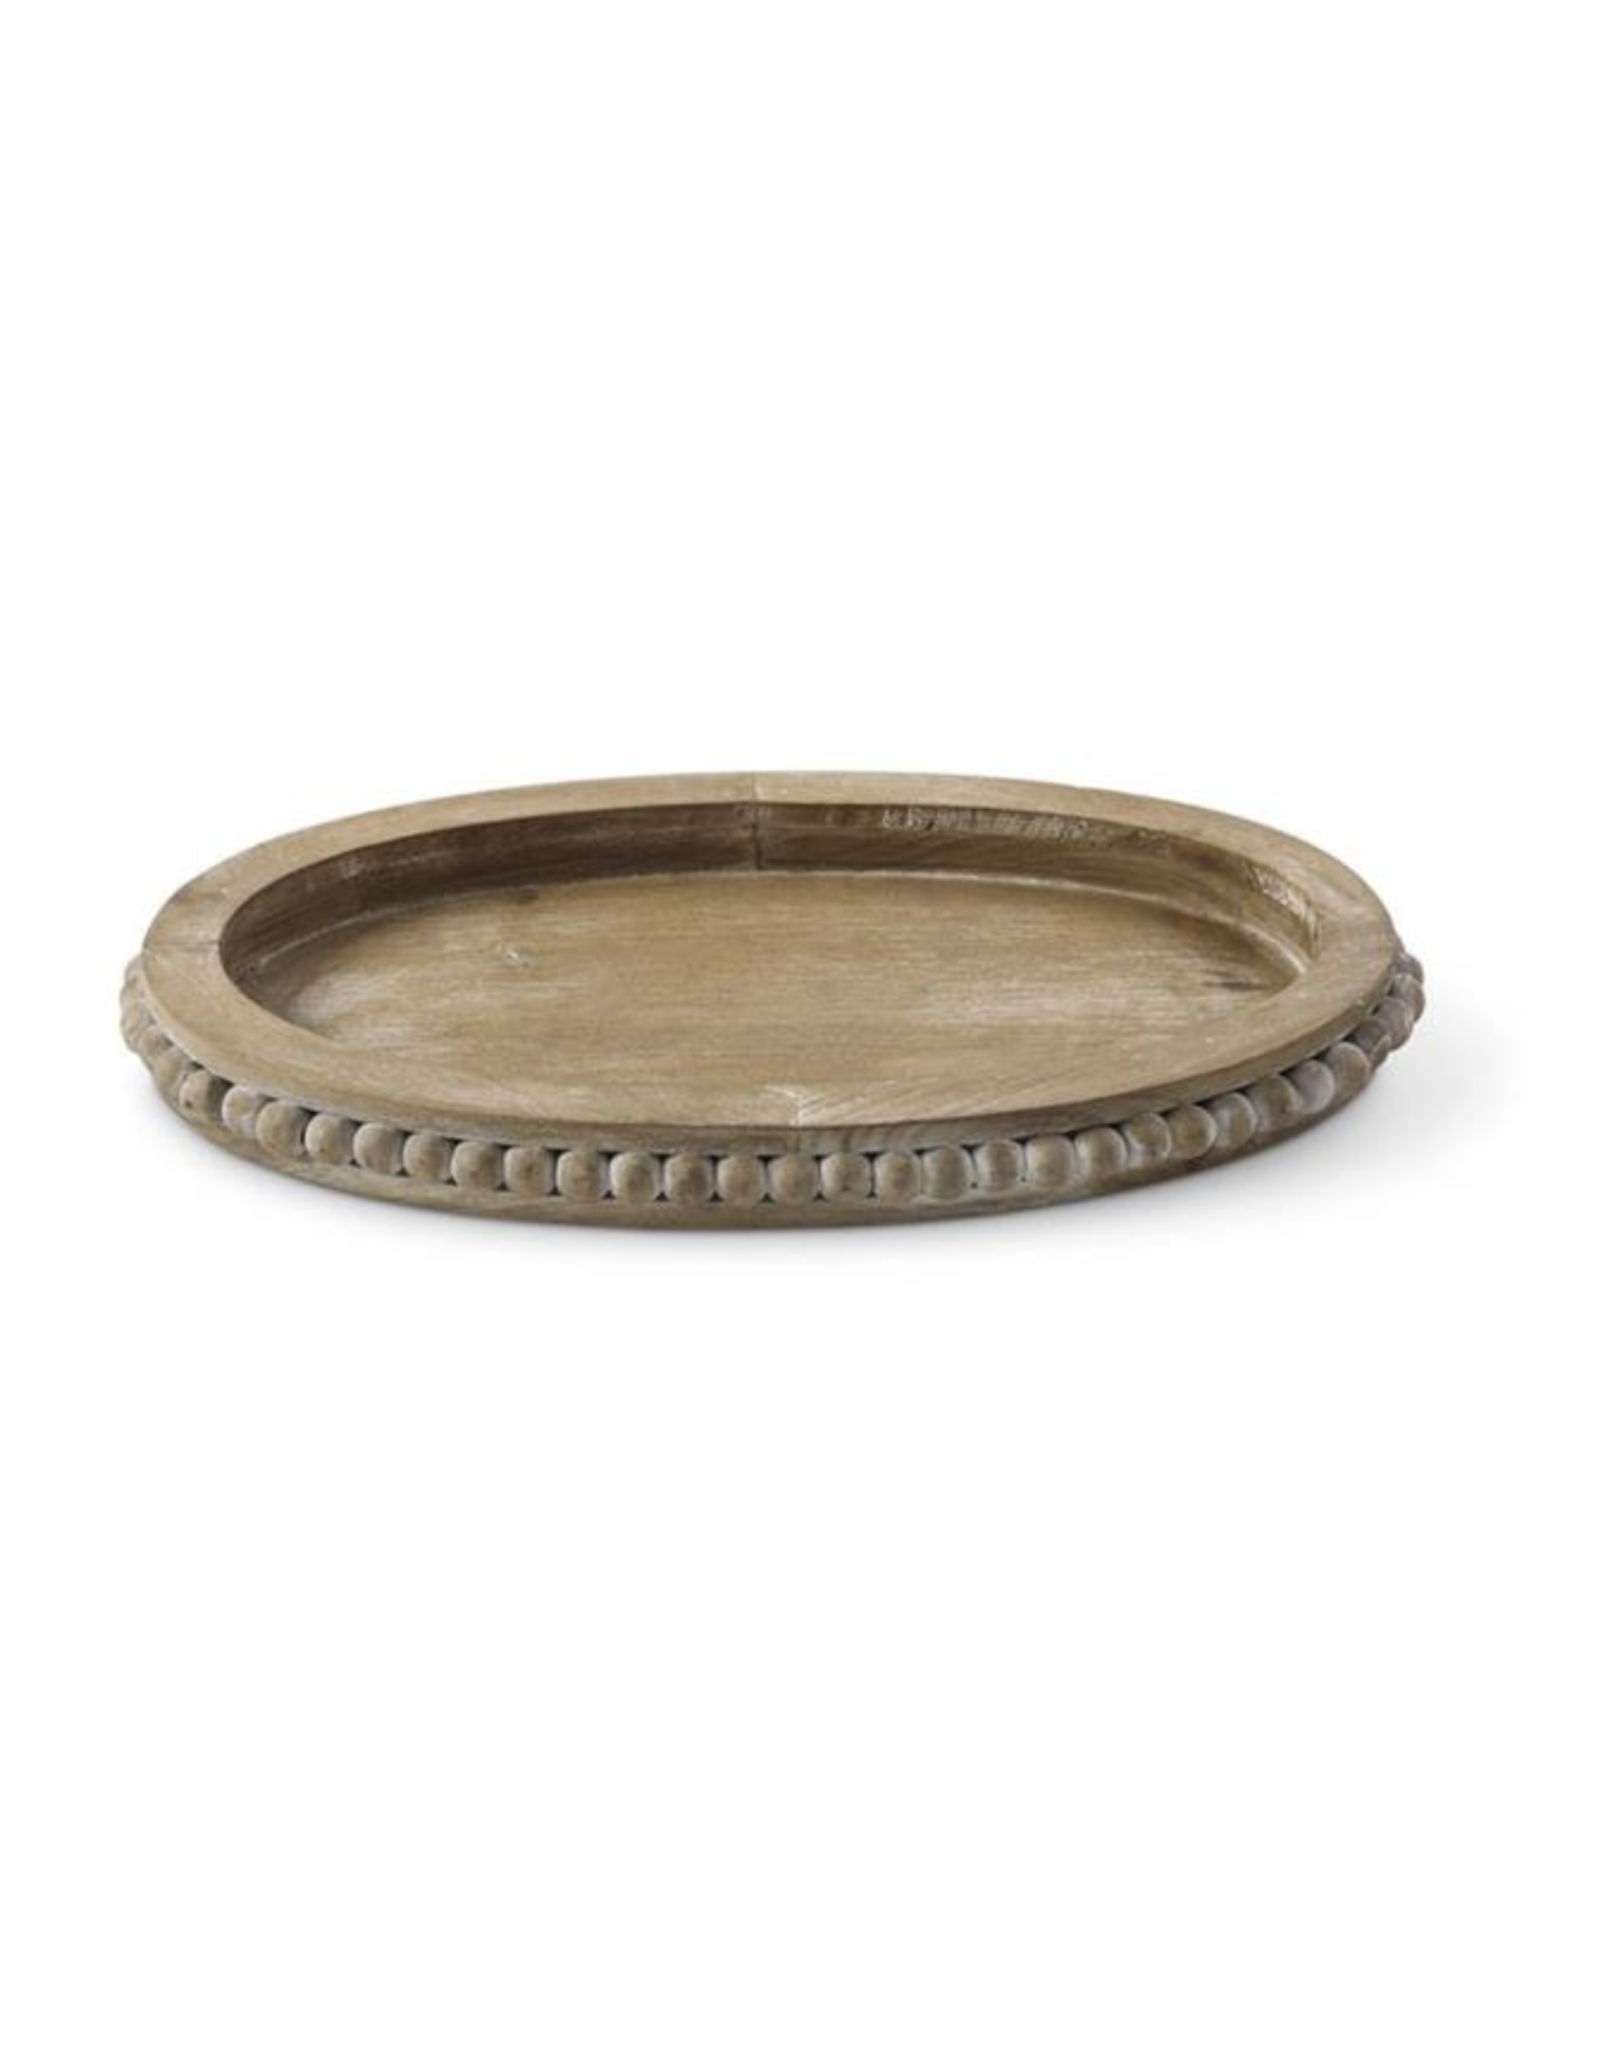 K & K Bead Trim Wooden Oval Tray, Small